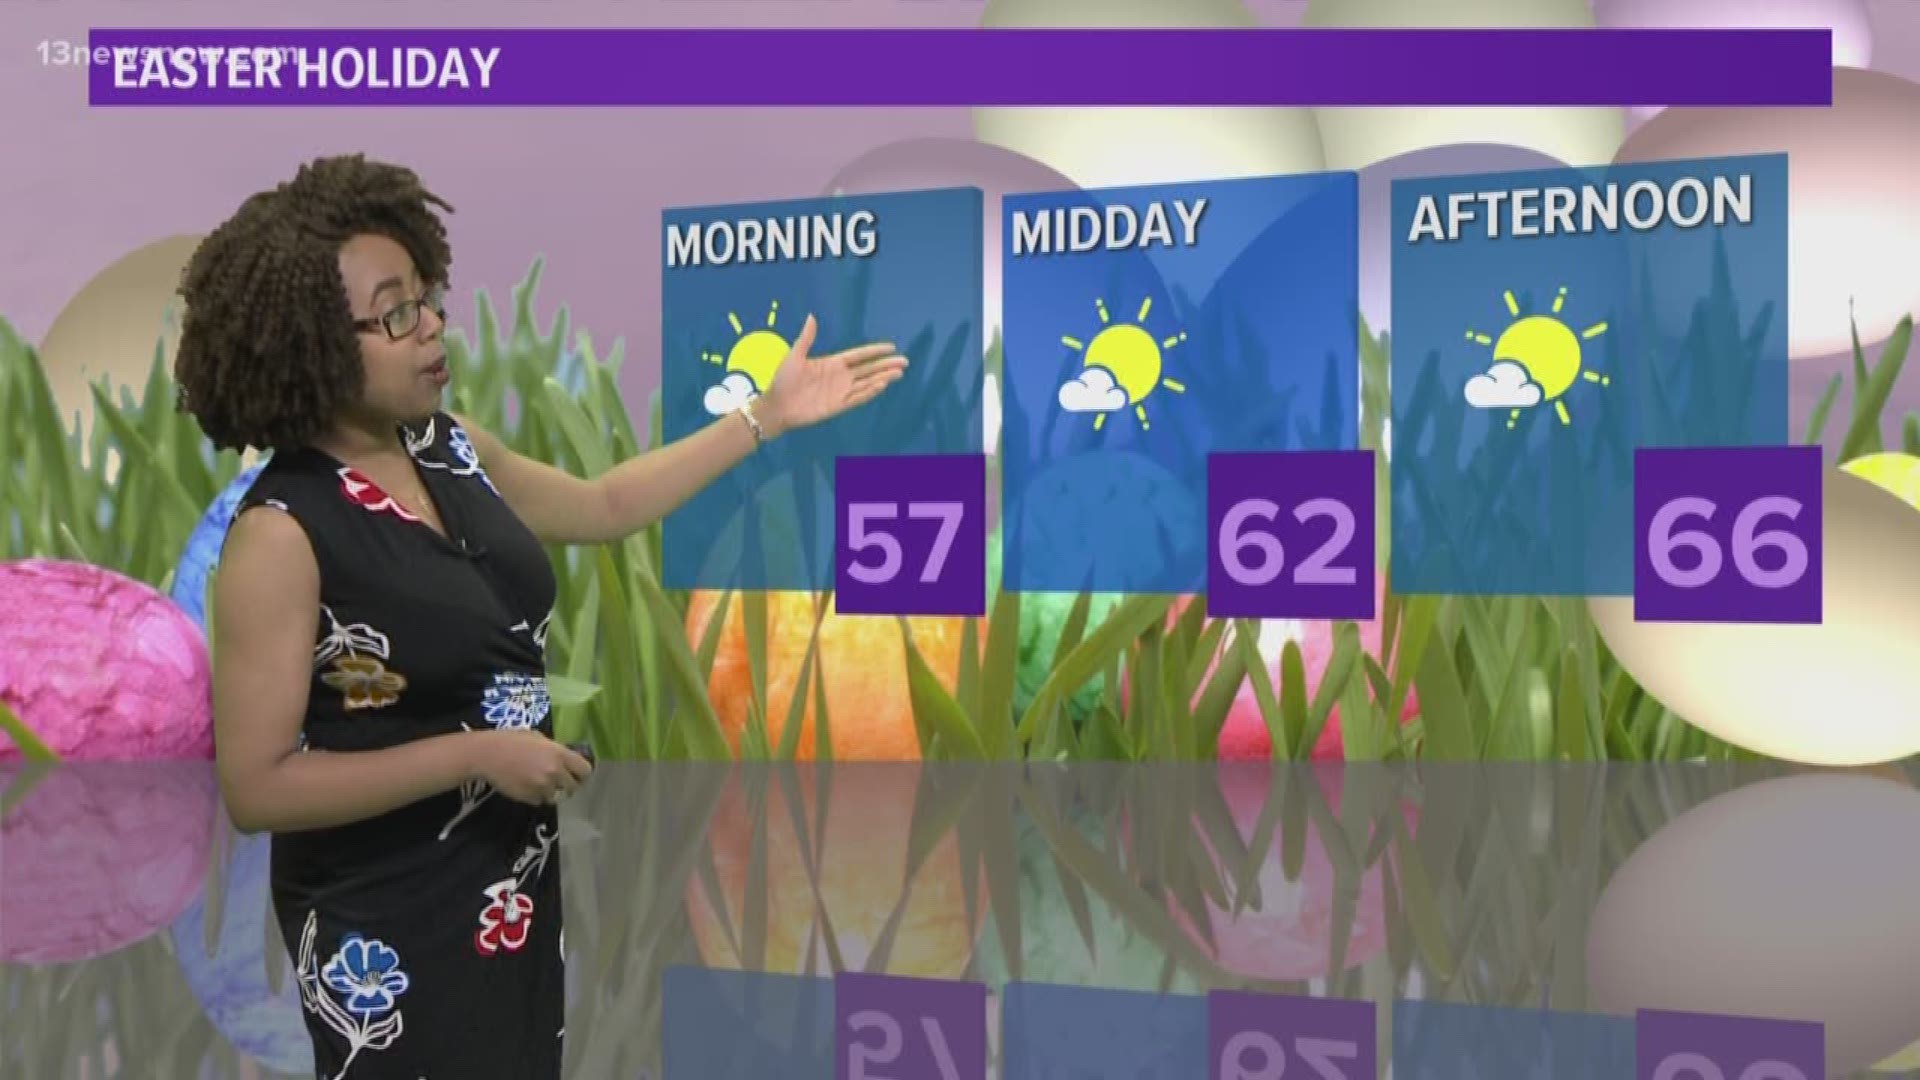 Meteorologist Rachael Peart brings you the forecast from the Weather Authority.